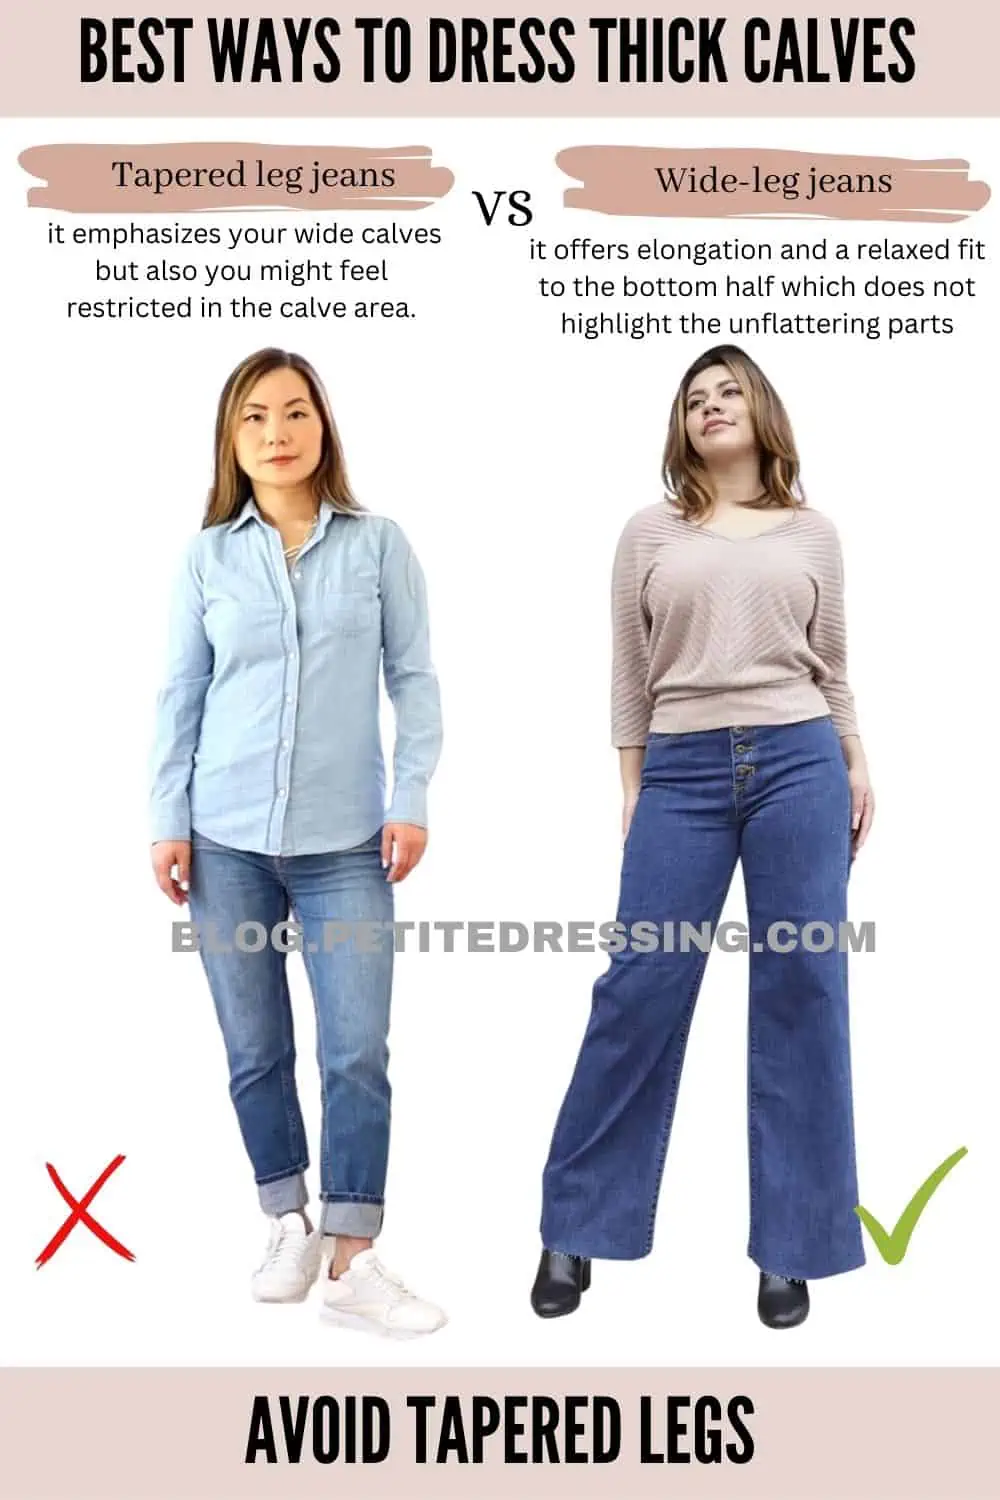 Best jeans for big thighs - jeans that look fantastic on curvy legs